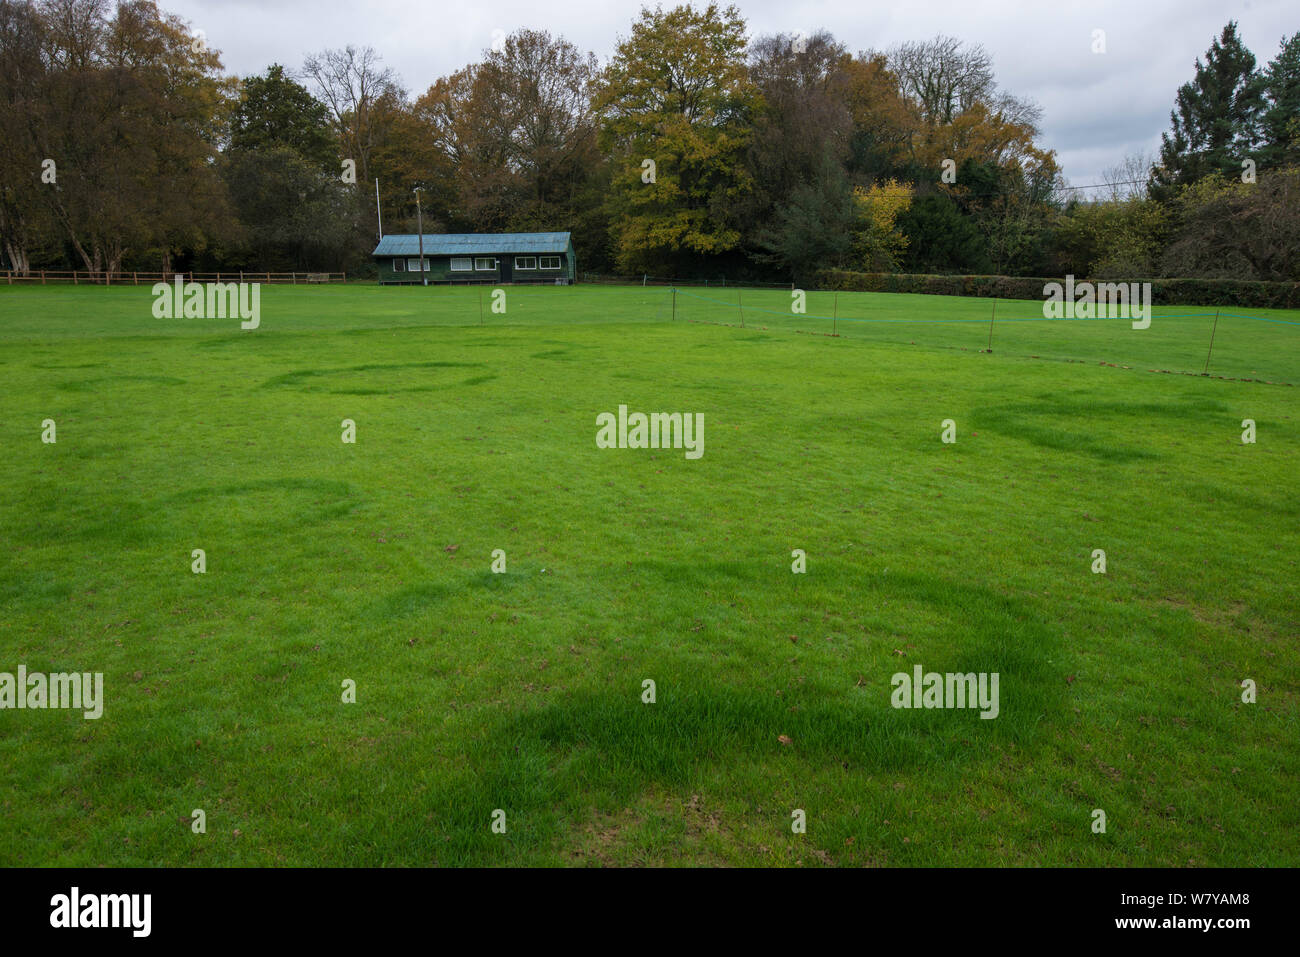 Fairy ring created by fungus growth in grass of cricket pitch. Sussex, UK, November. Stock Photo